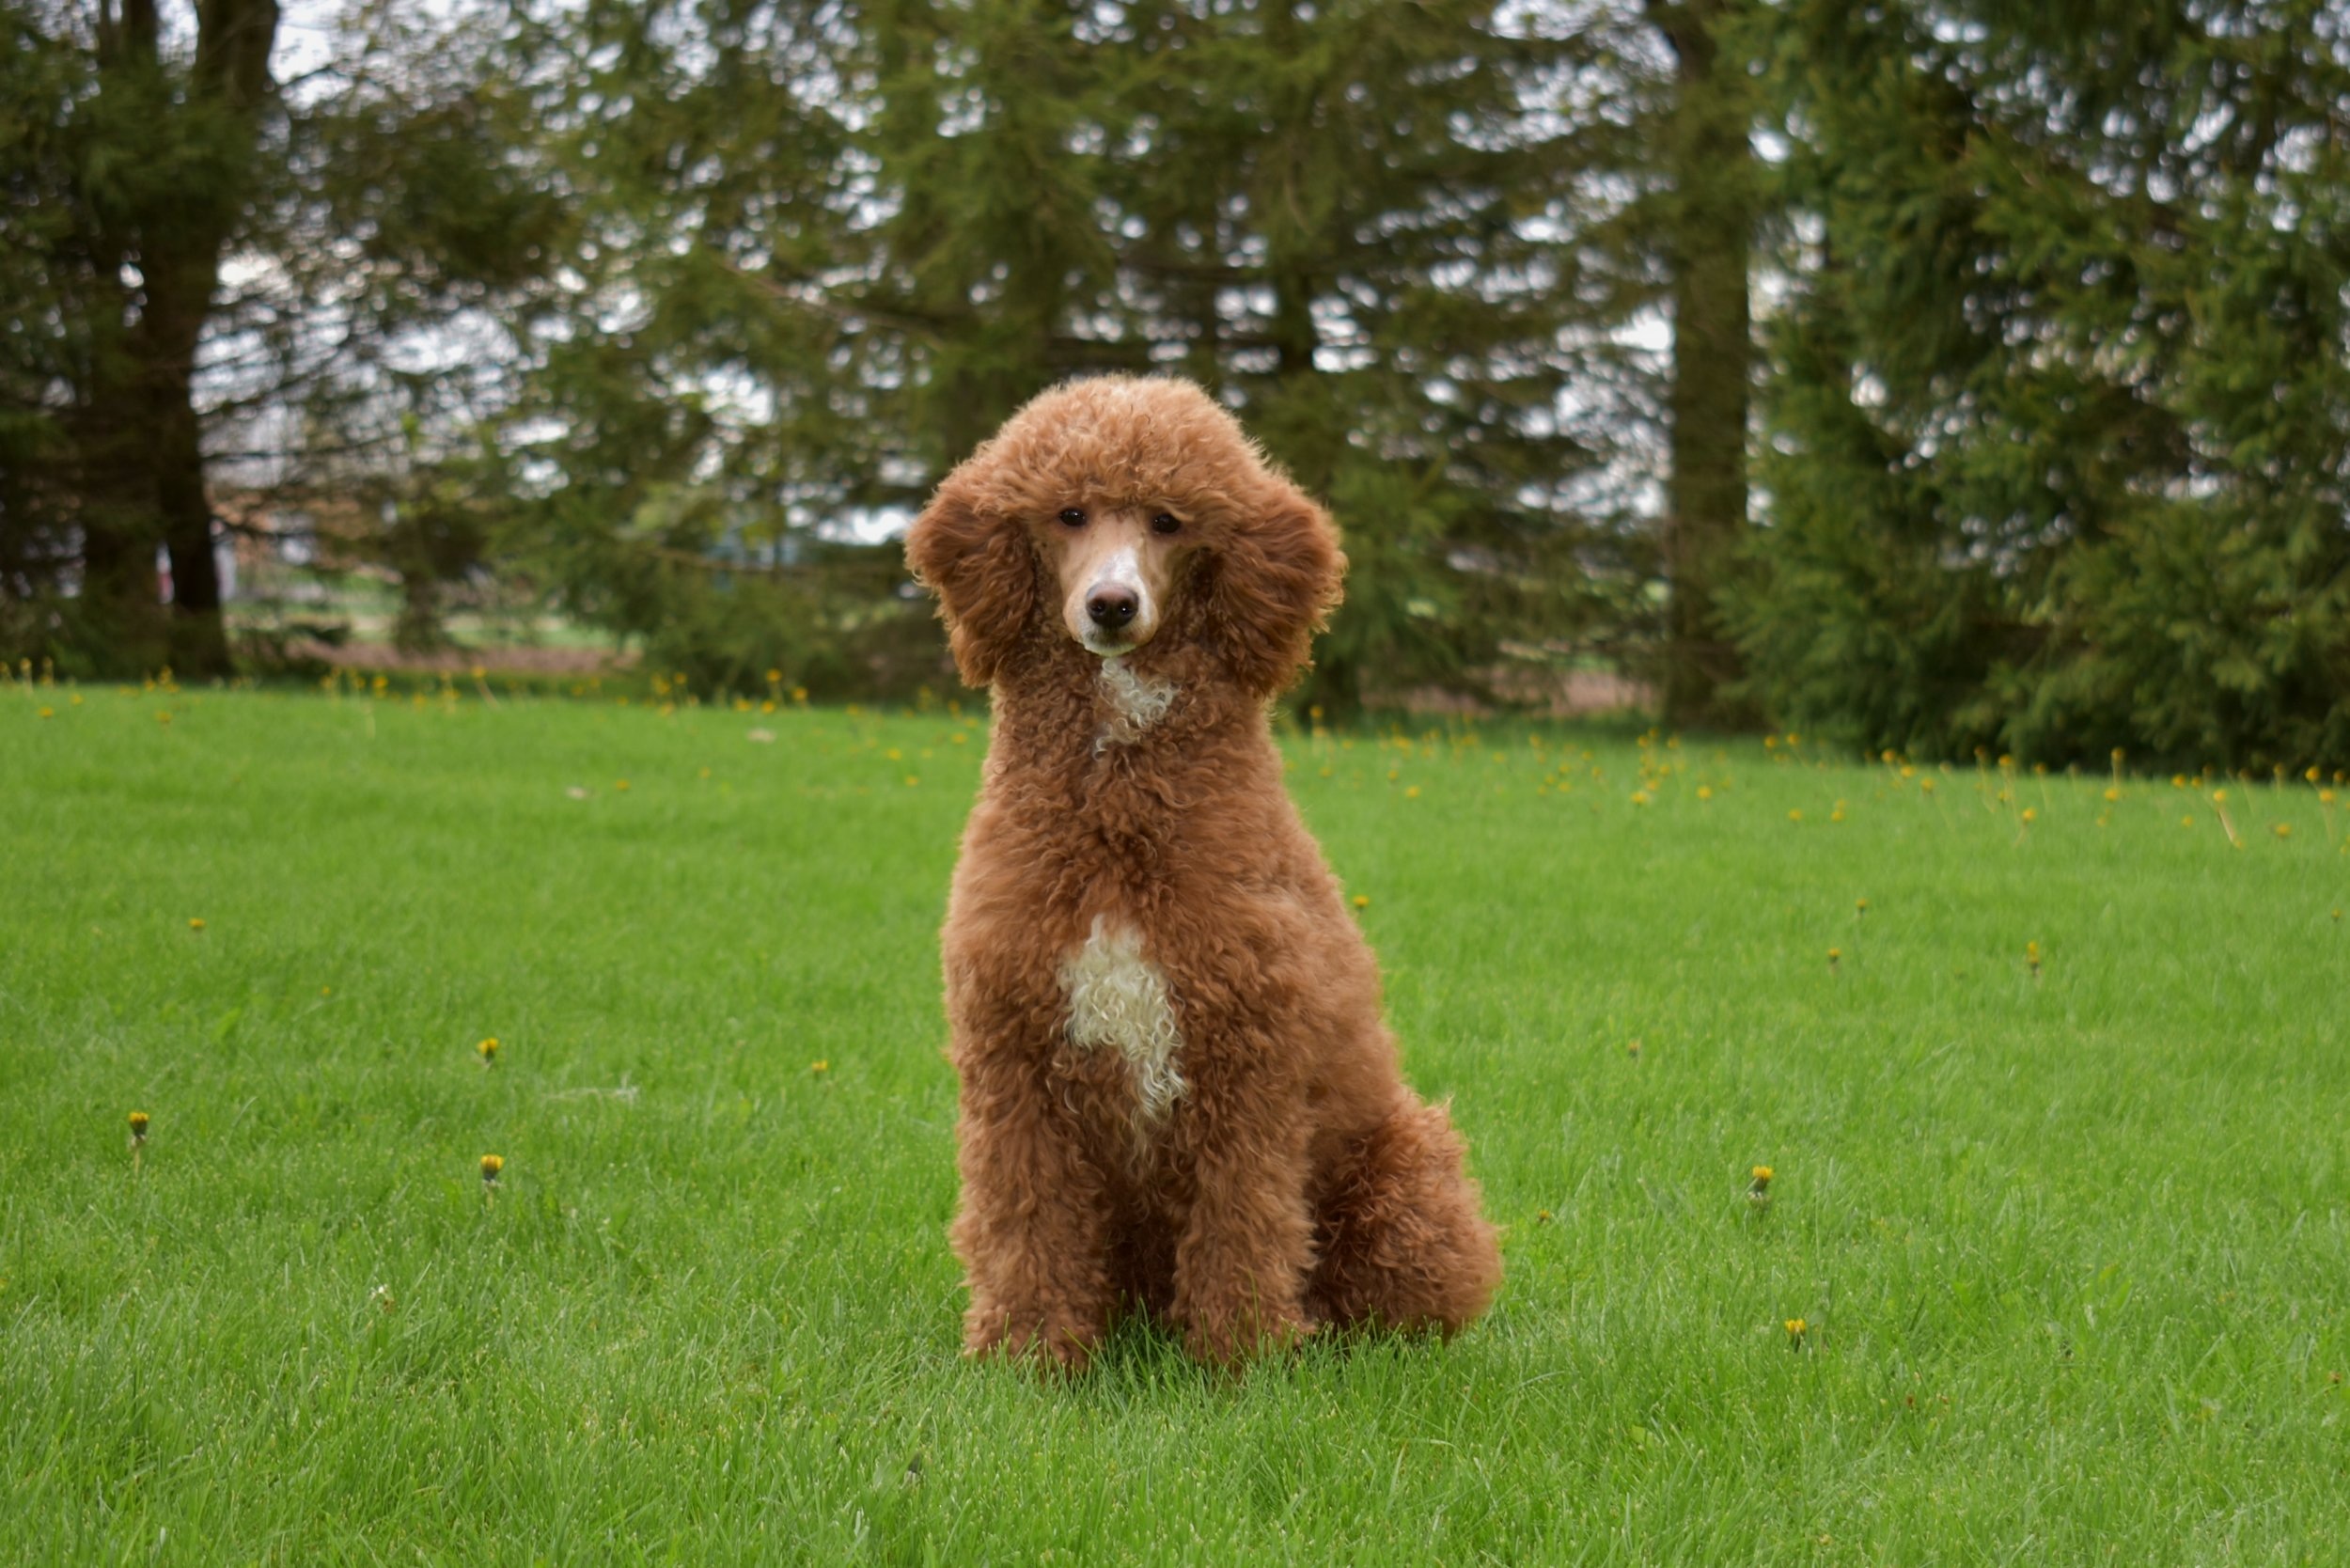  Red Moyen Poodle sitting on the grass in southern Ontario north of Toronto. He will be the father of adorable F1 and F1B Goldendoodle puppies at Crosshill Doodles. 